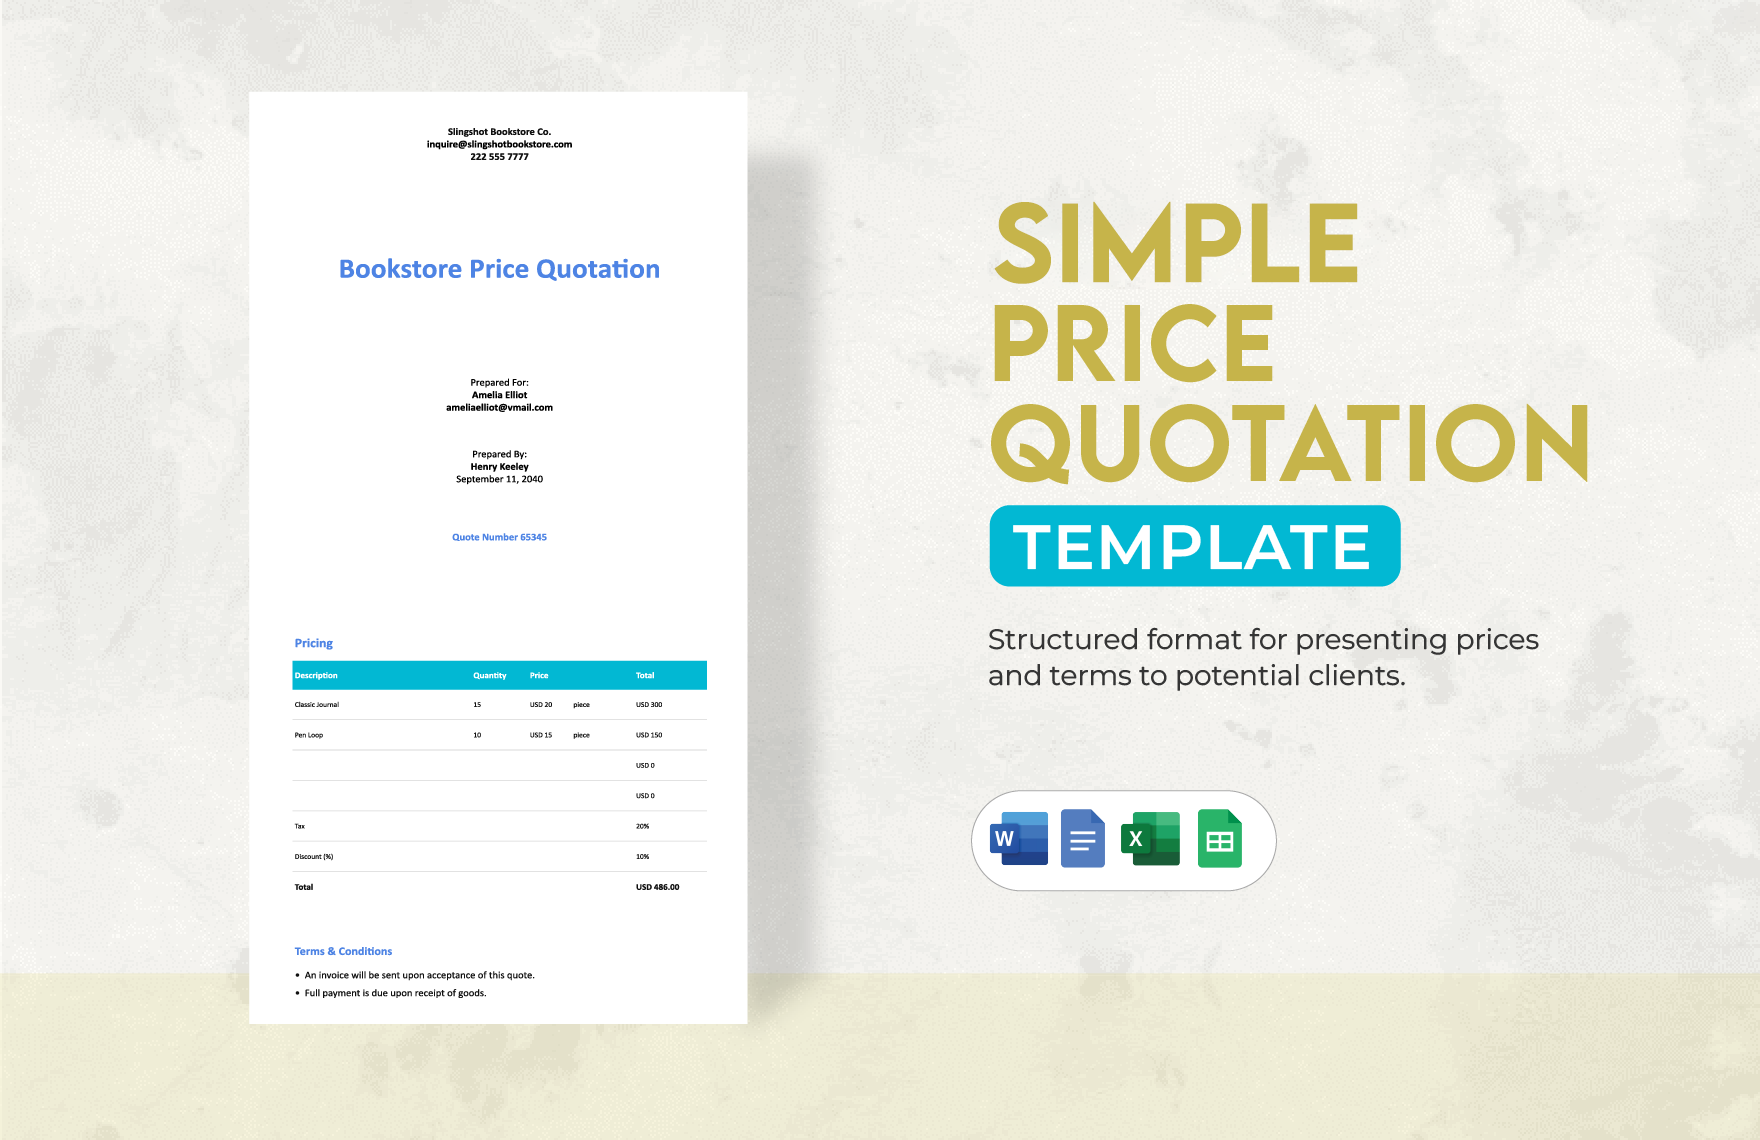 Simple Price Quotation Template in Word, Google Docs, Excel, Google Sheets